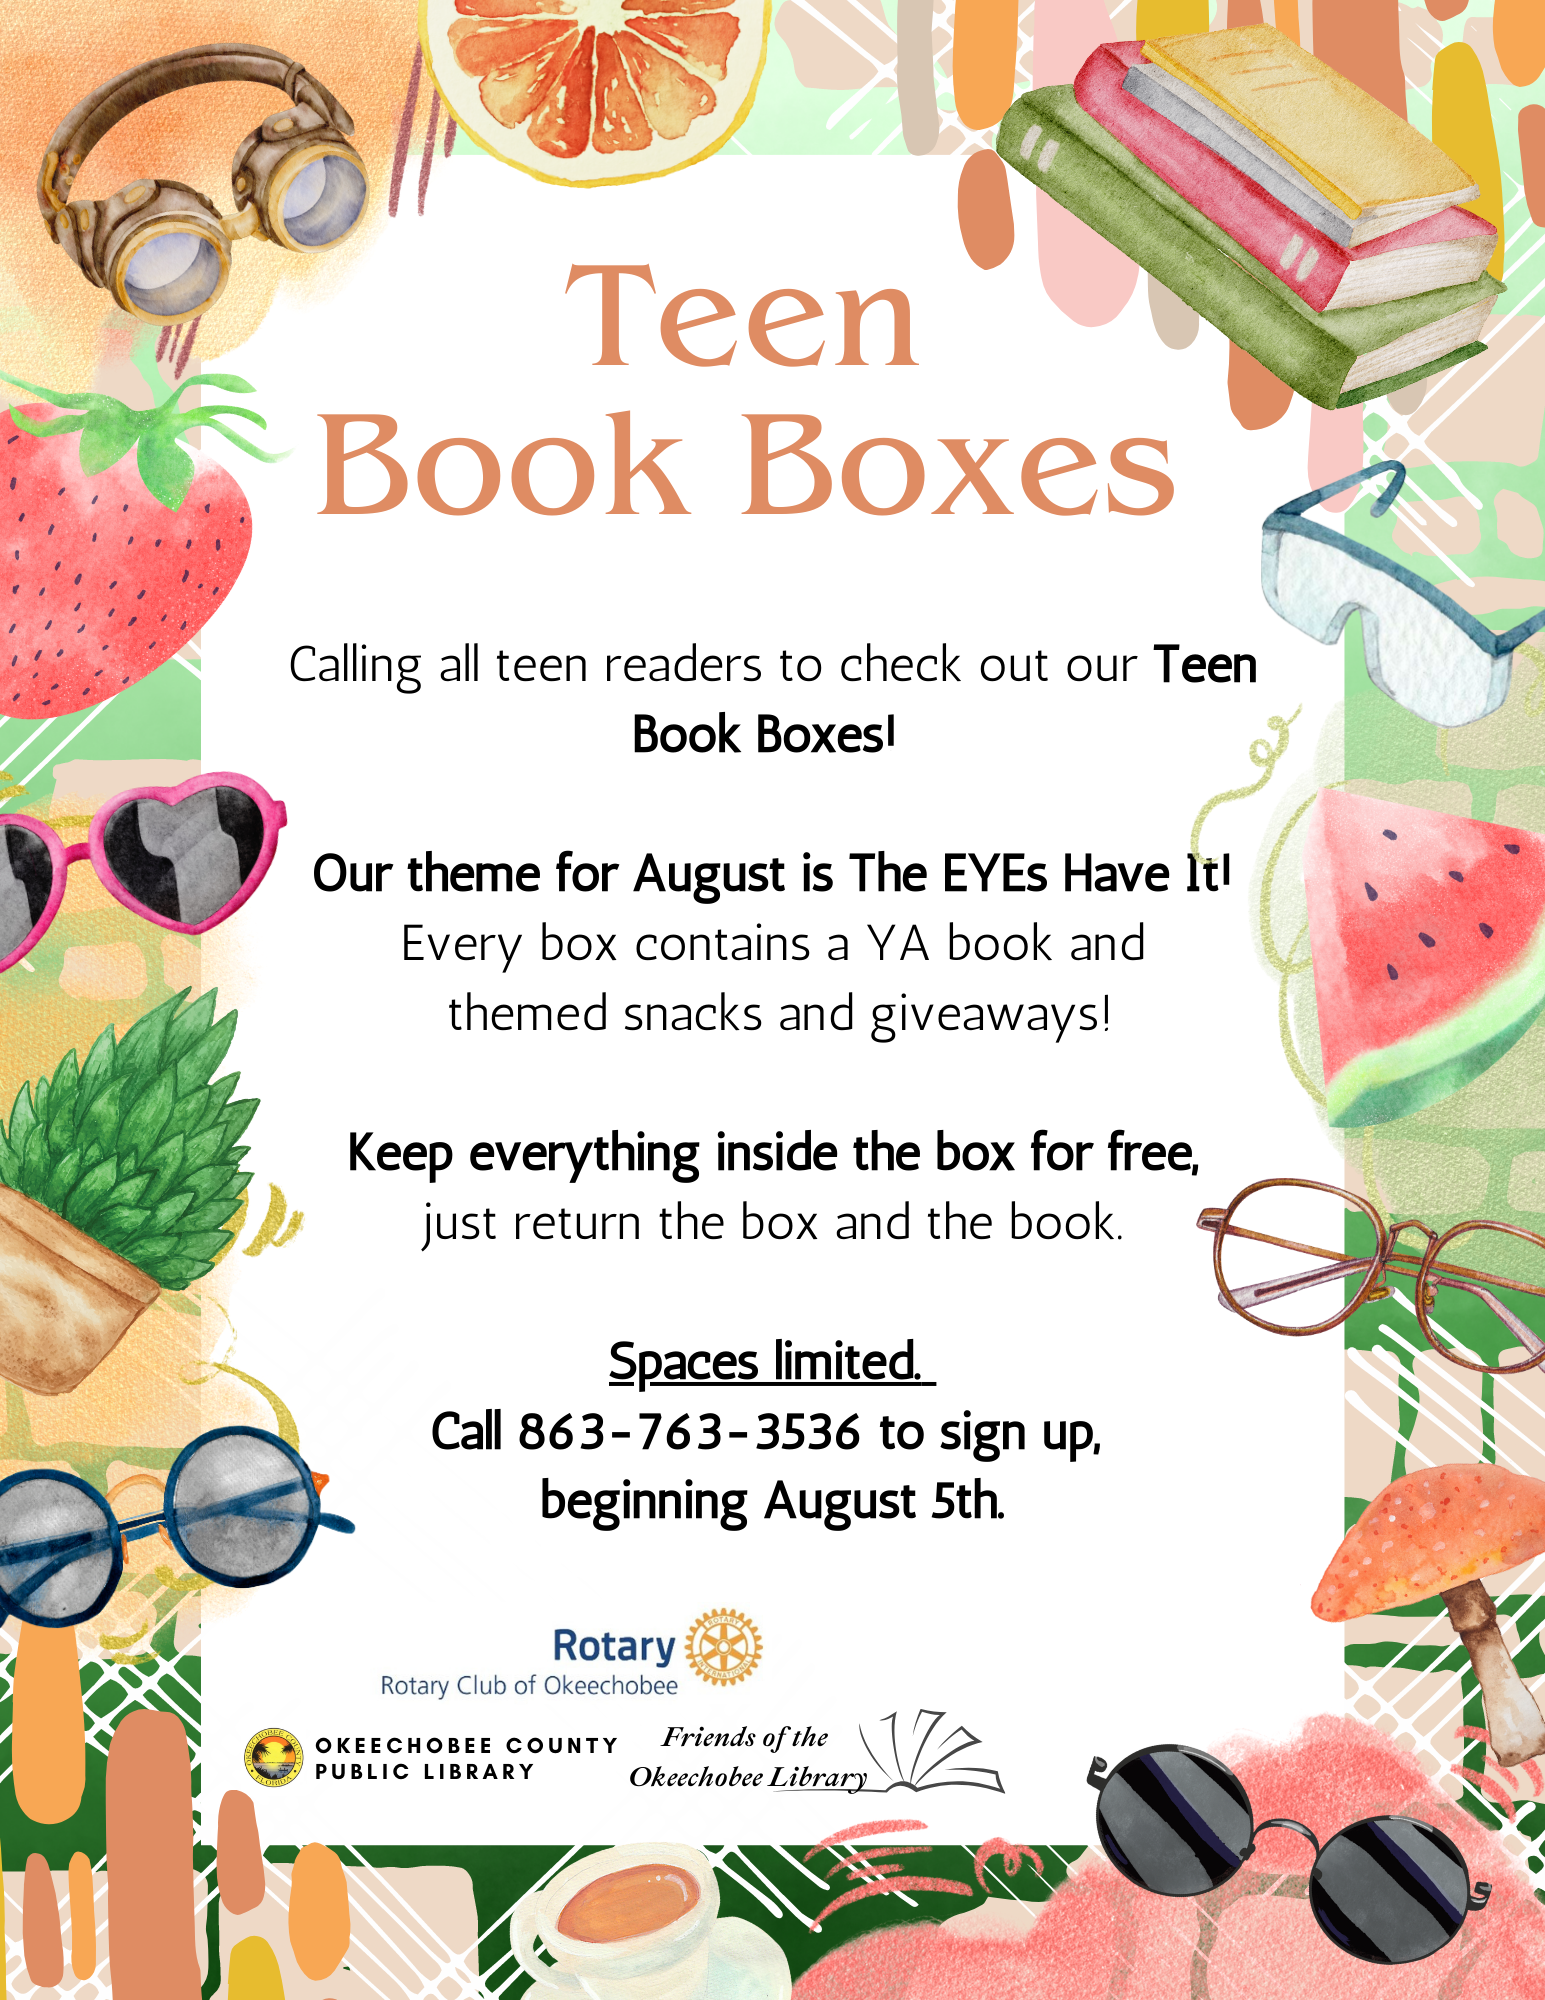 Open to all teens, get free prizes and snacks just for checking out a book!